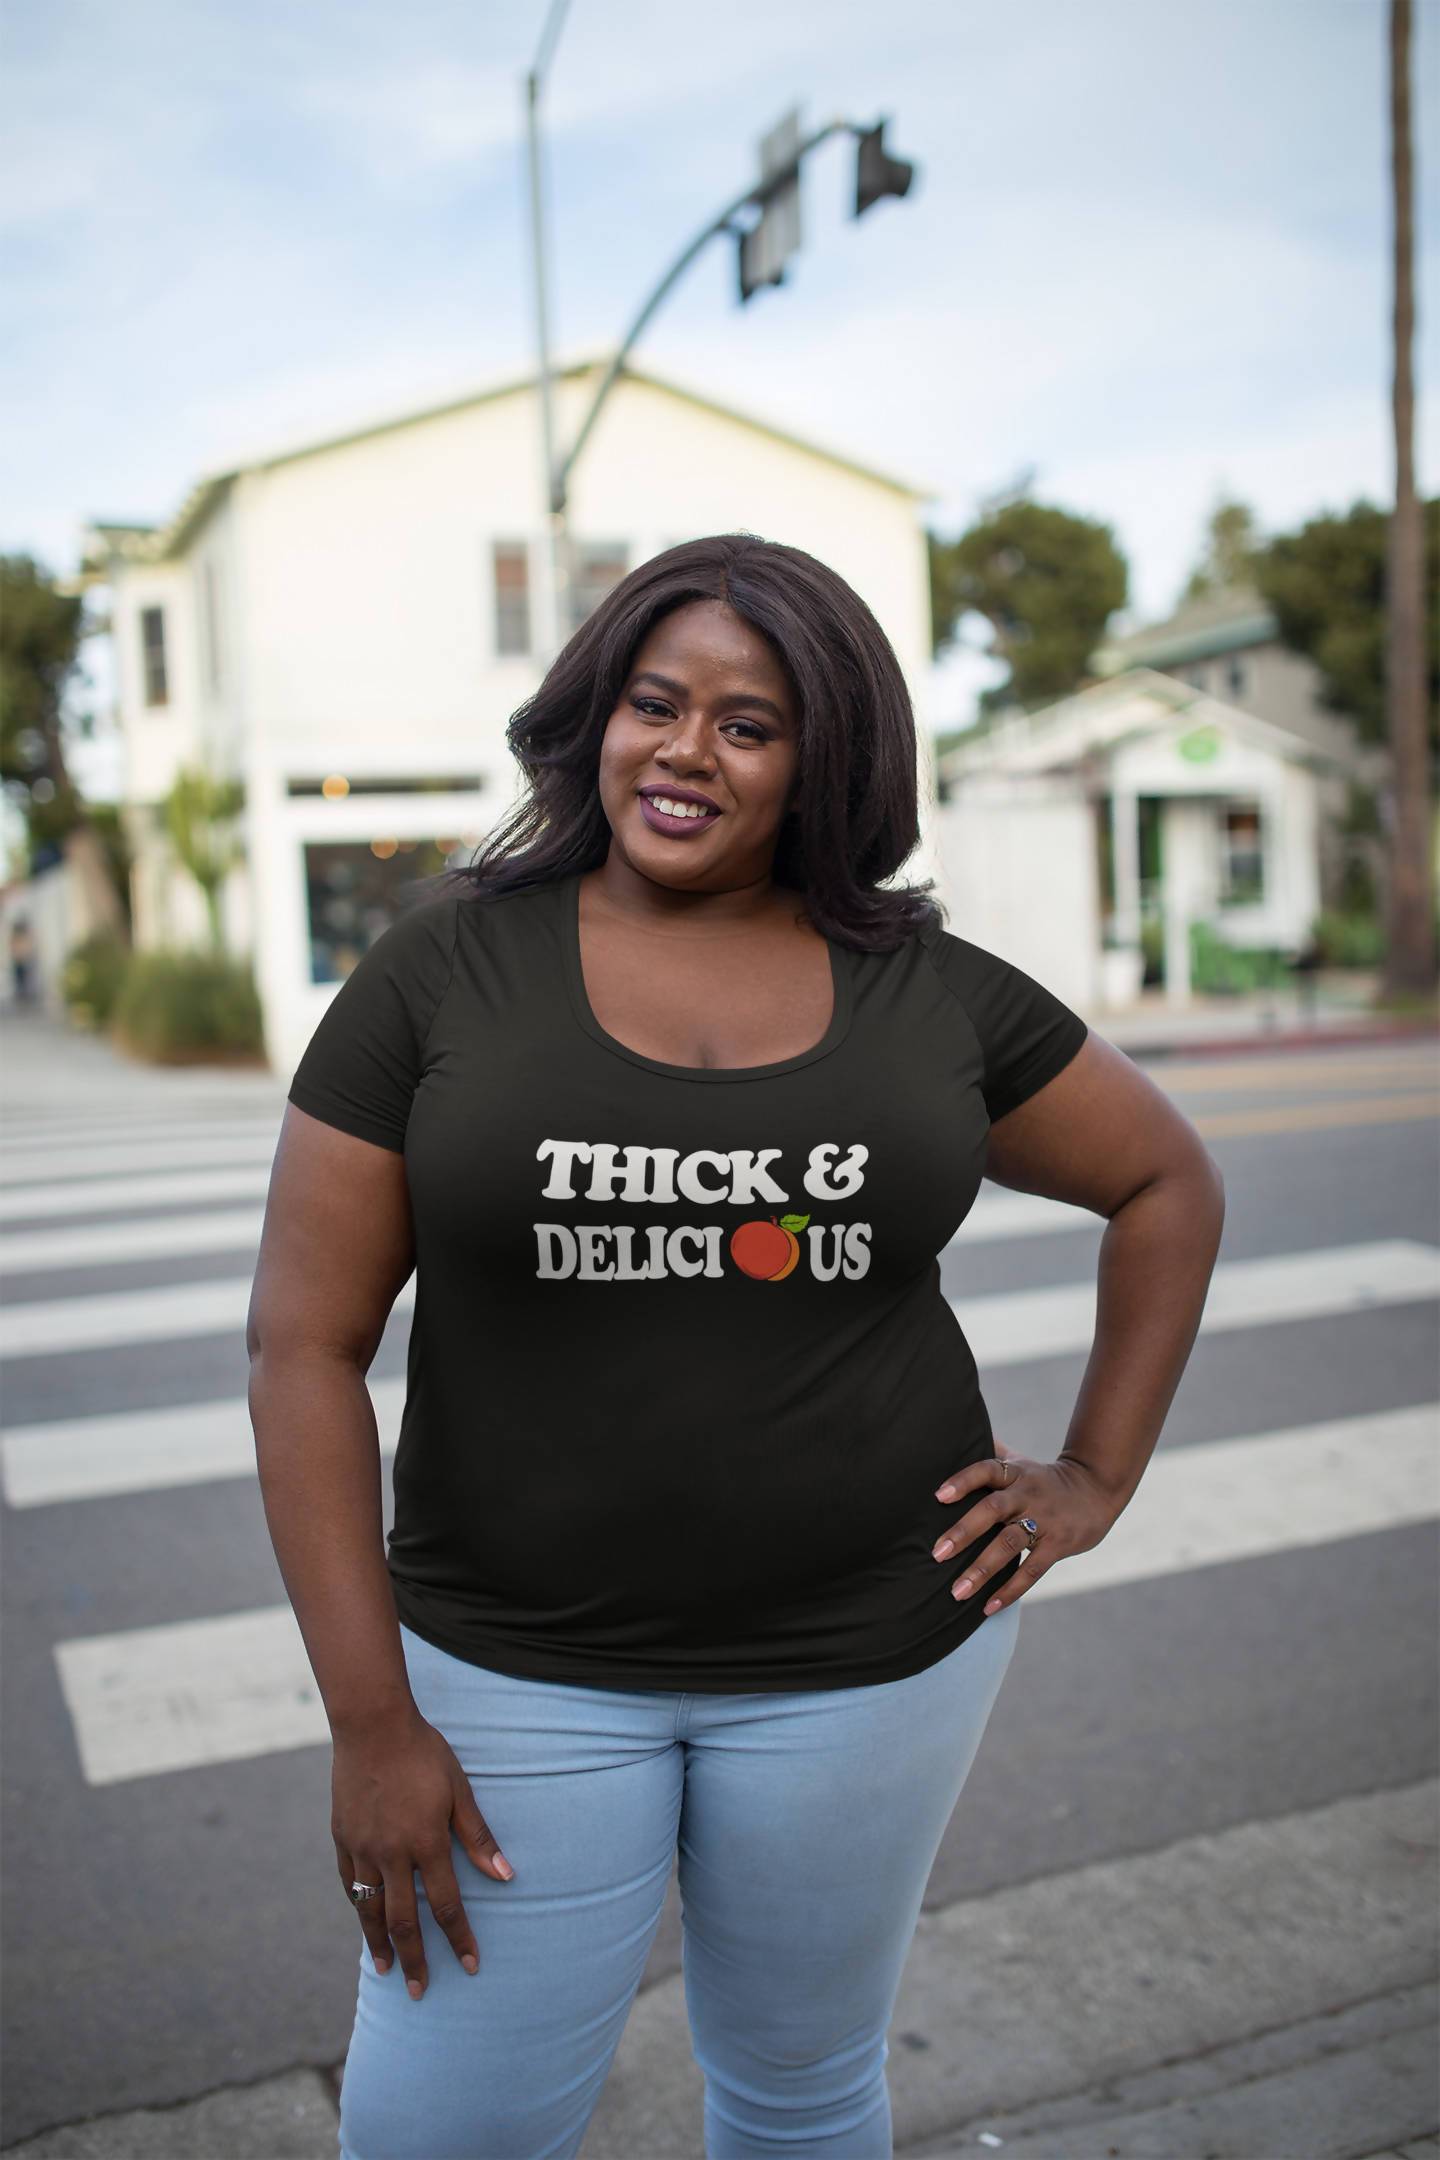 Thick & Delicious Ladies T-Shirt - FulFill4me - 3J Tee's & More